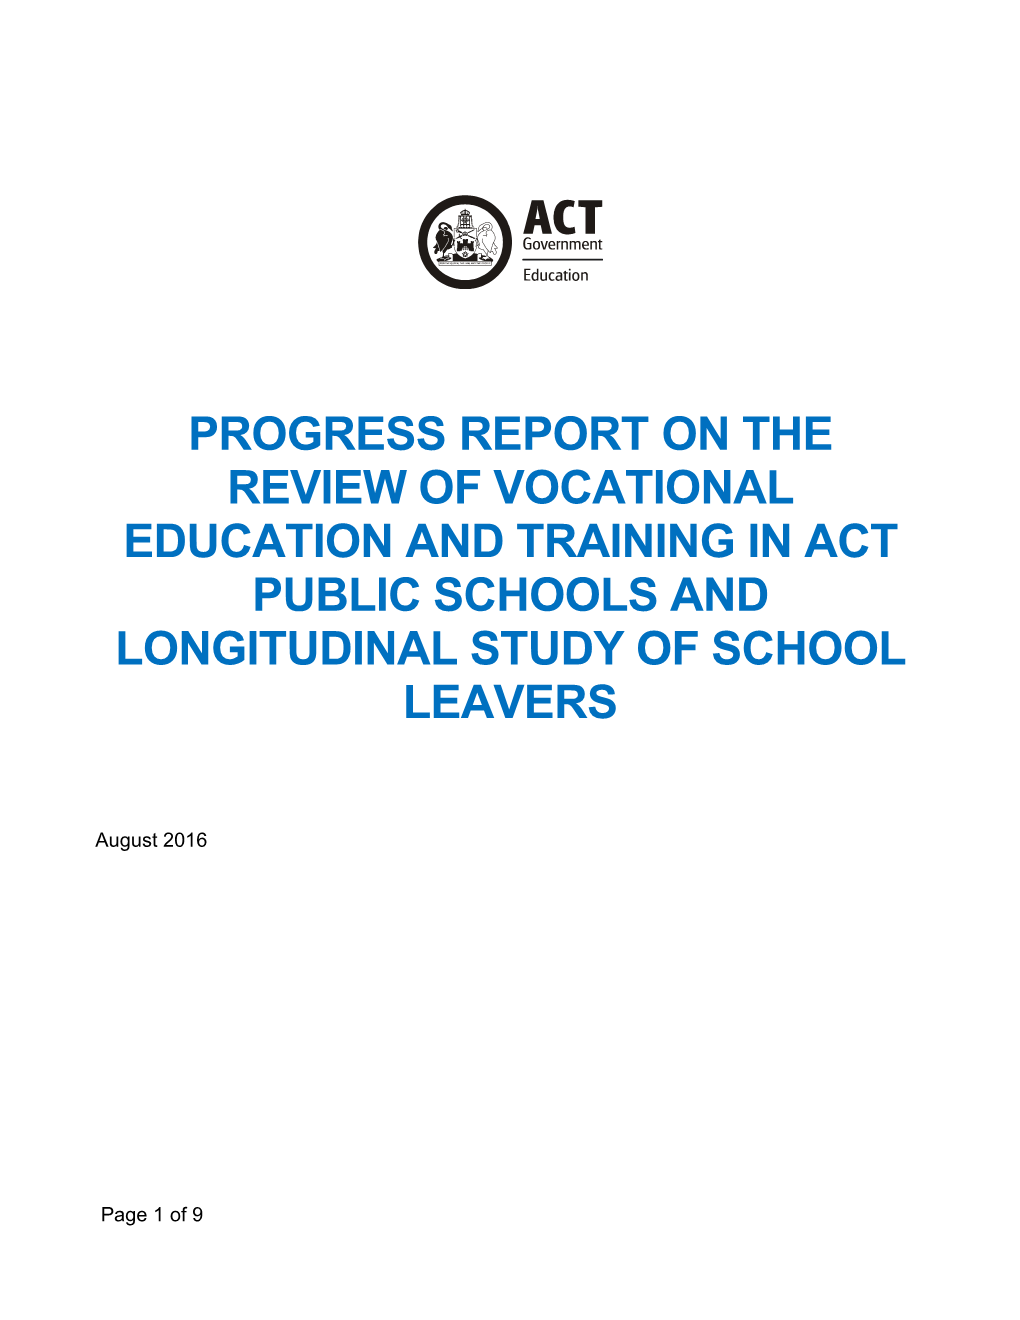 Progress Report on the Review of Vocational Education and Training in ACT Public Schools